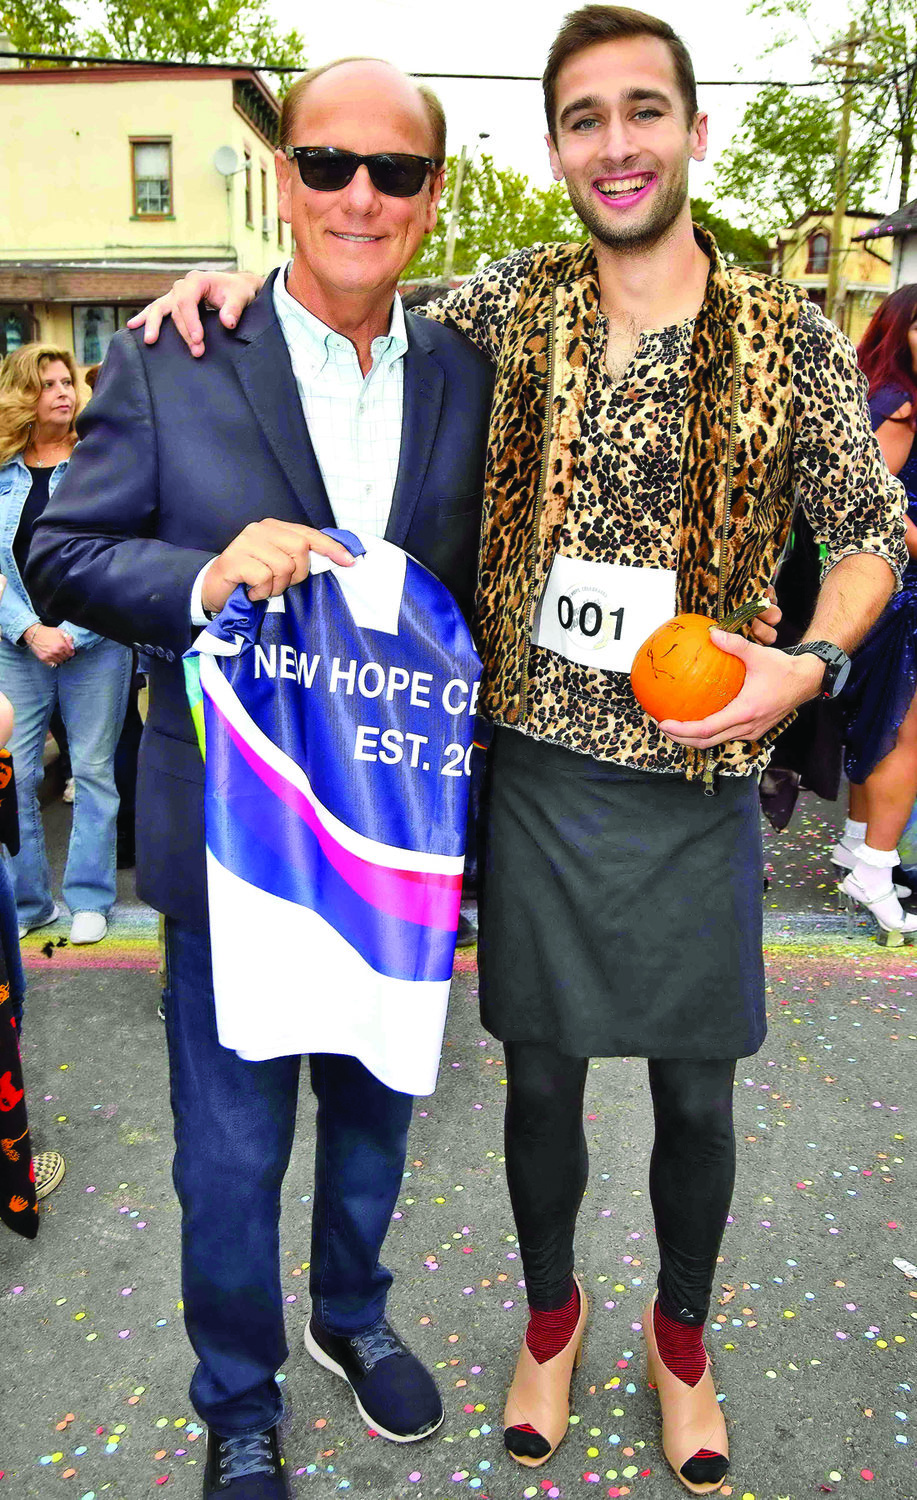 Mayor of New Hope Larry Keller with Colin McClusick, the winner of the race.